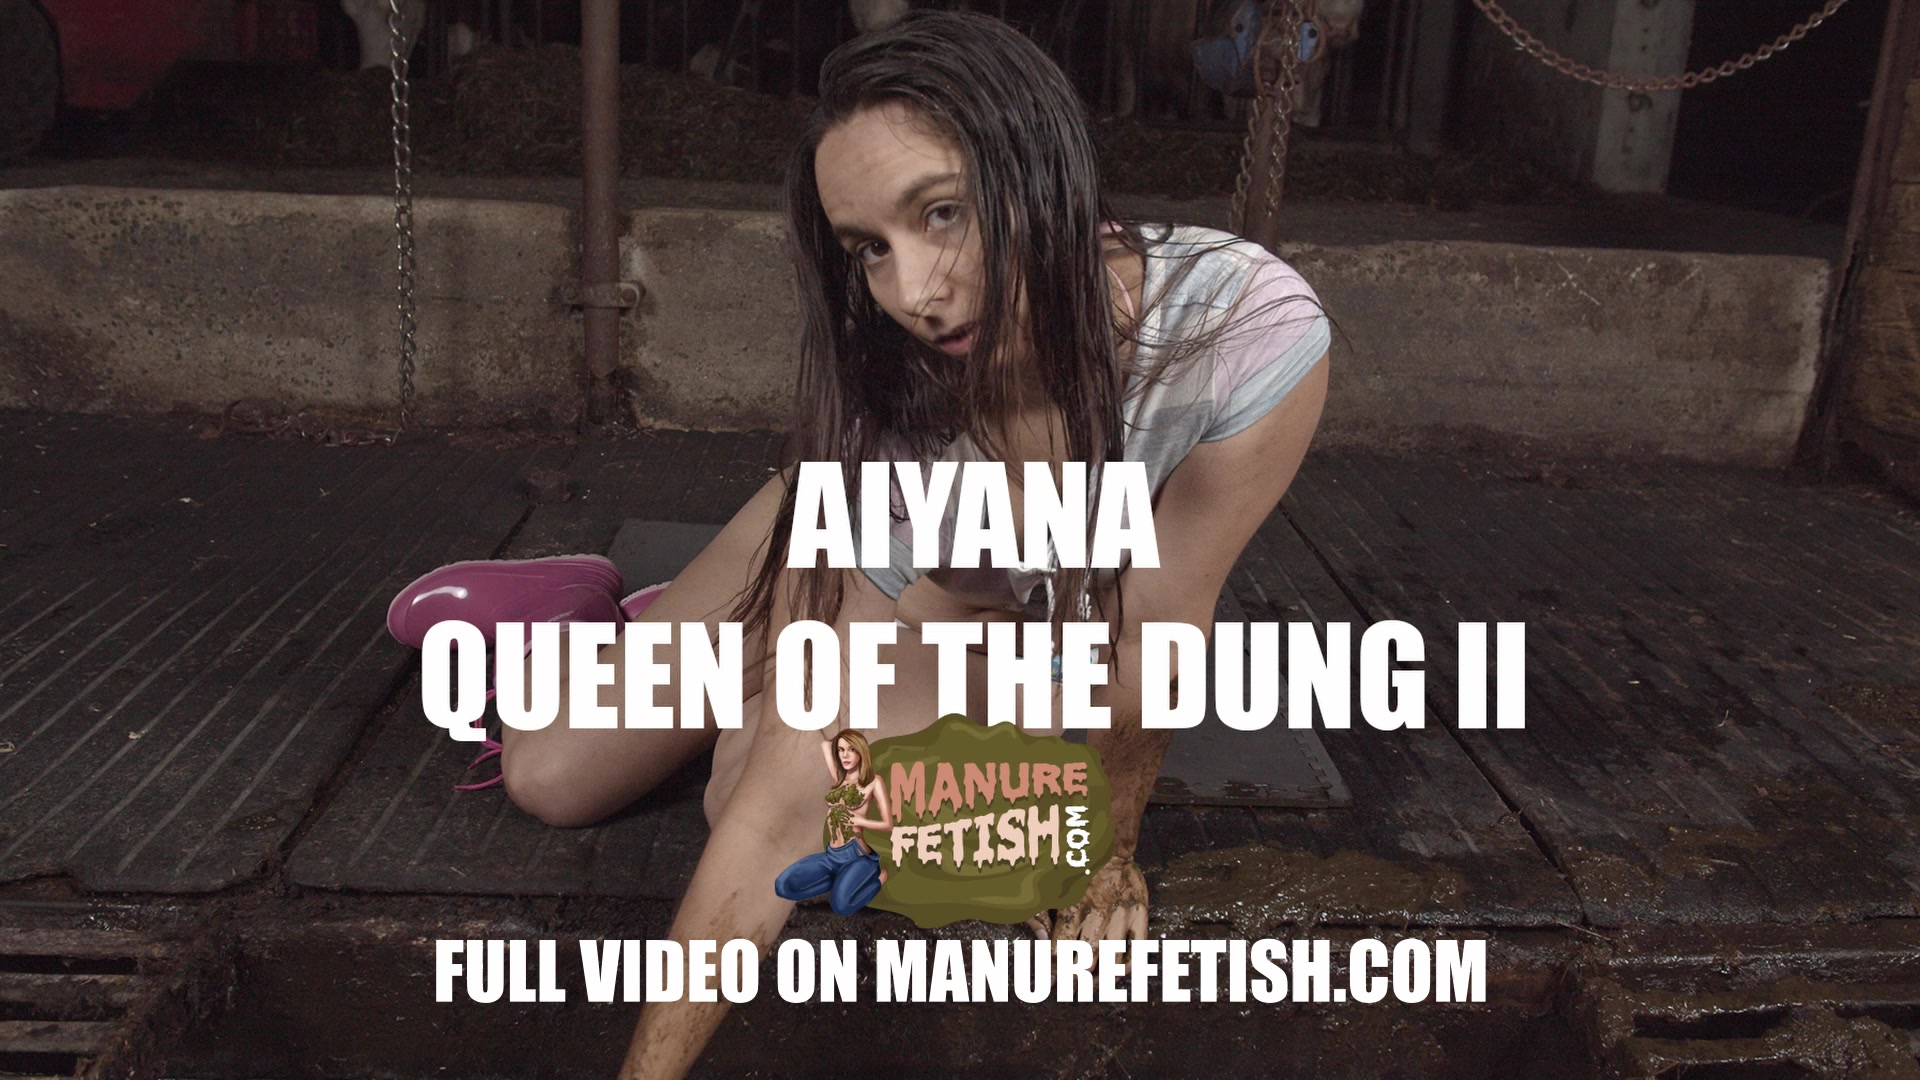 Girl bathing in cowshit - ManureFetish - Queen of the dung 2